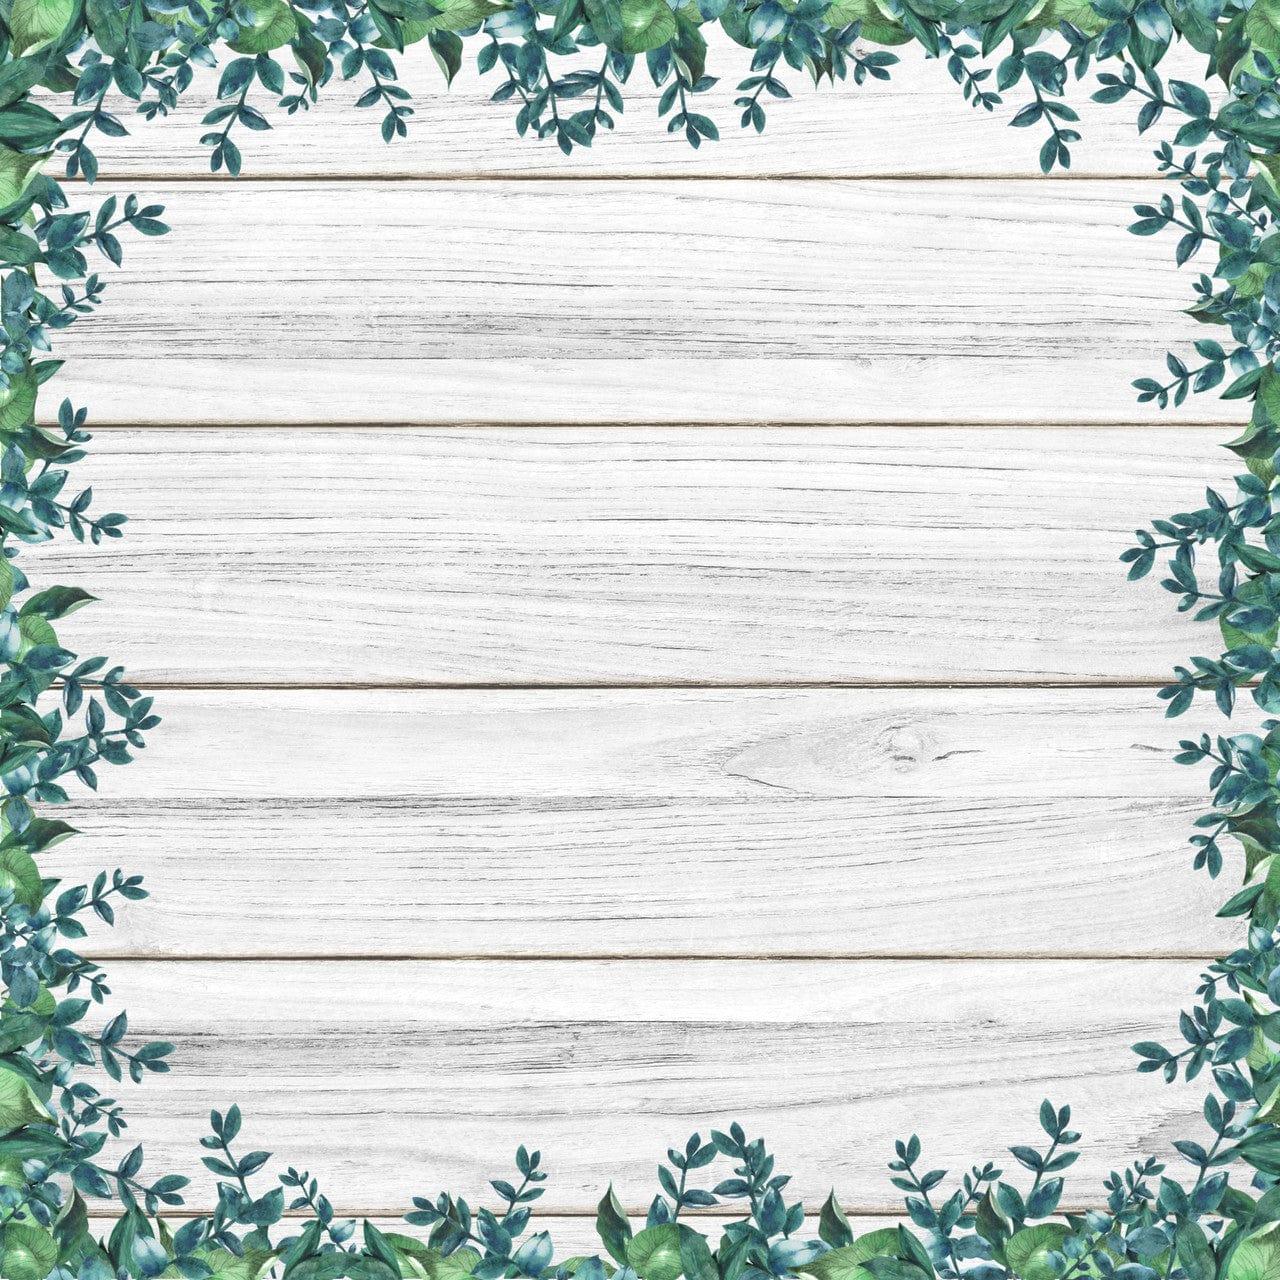 Rustic Wedding Collection To Have & To Hold 12 x 12 Double-Sided Scrapbook Paper by SSC Designs - Scrapbook Supply Companies